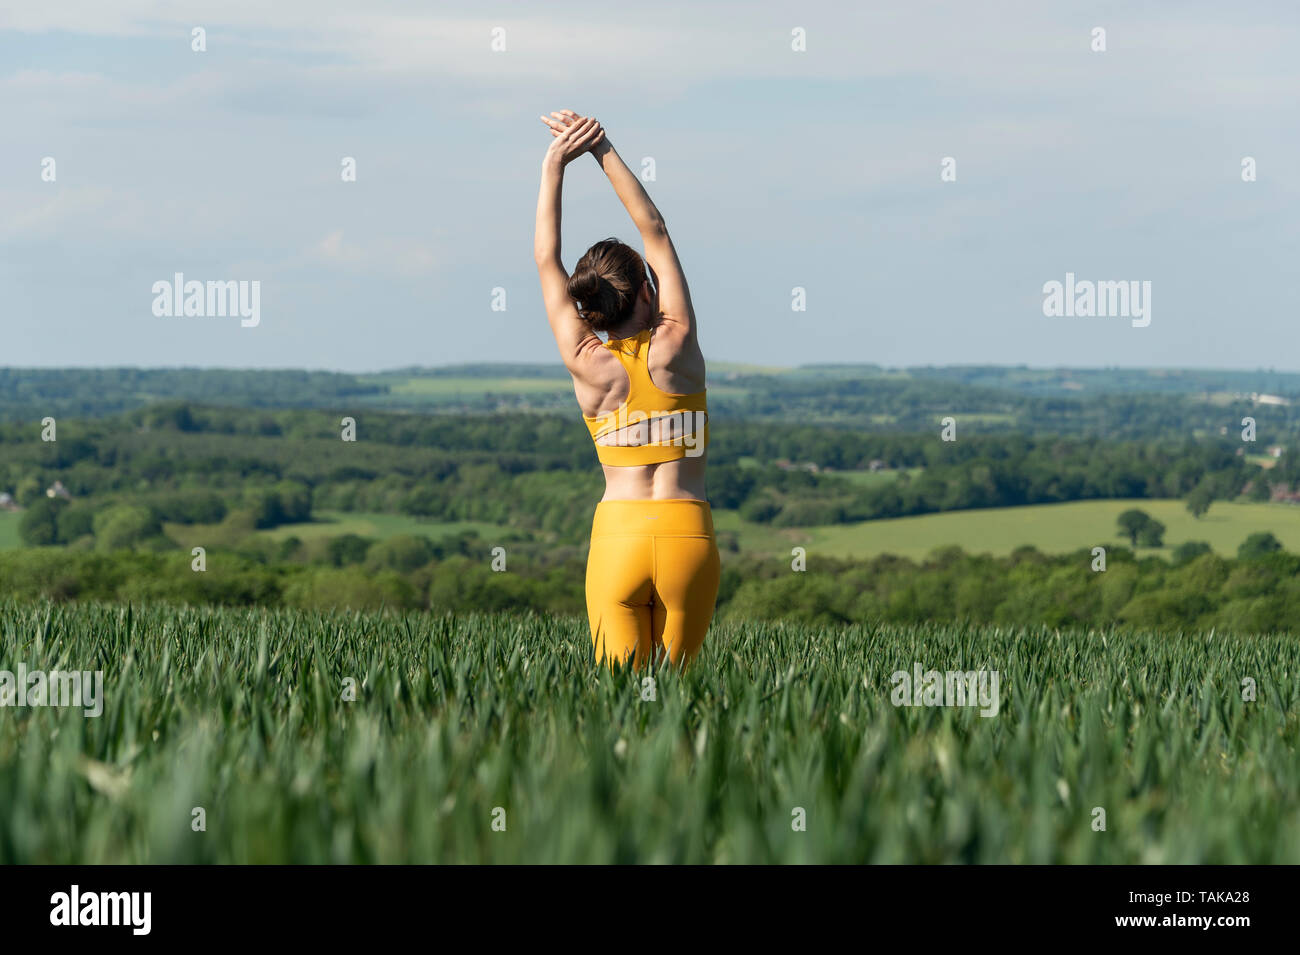 back view of a sporty woman standing in a field exercising and stretching. Stock Photo